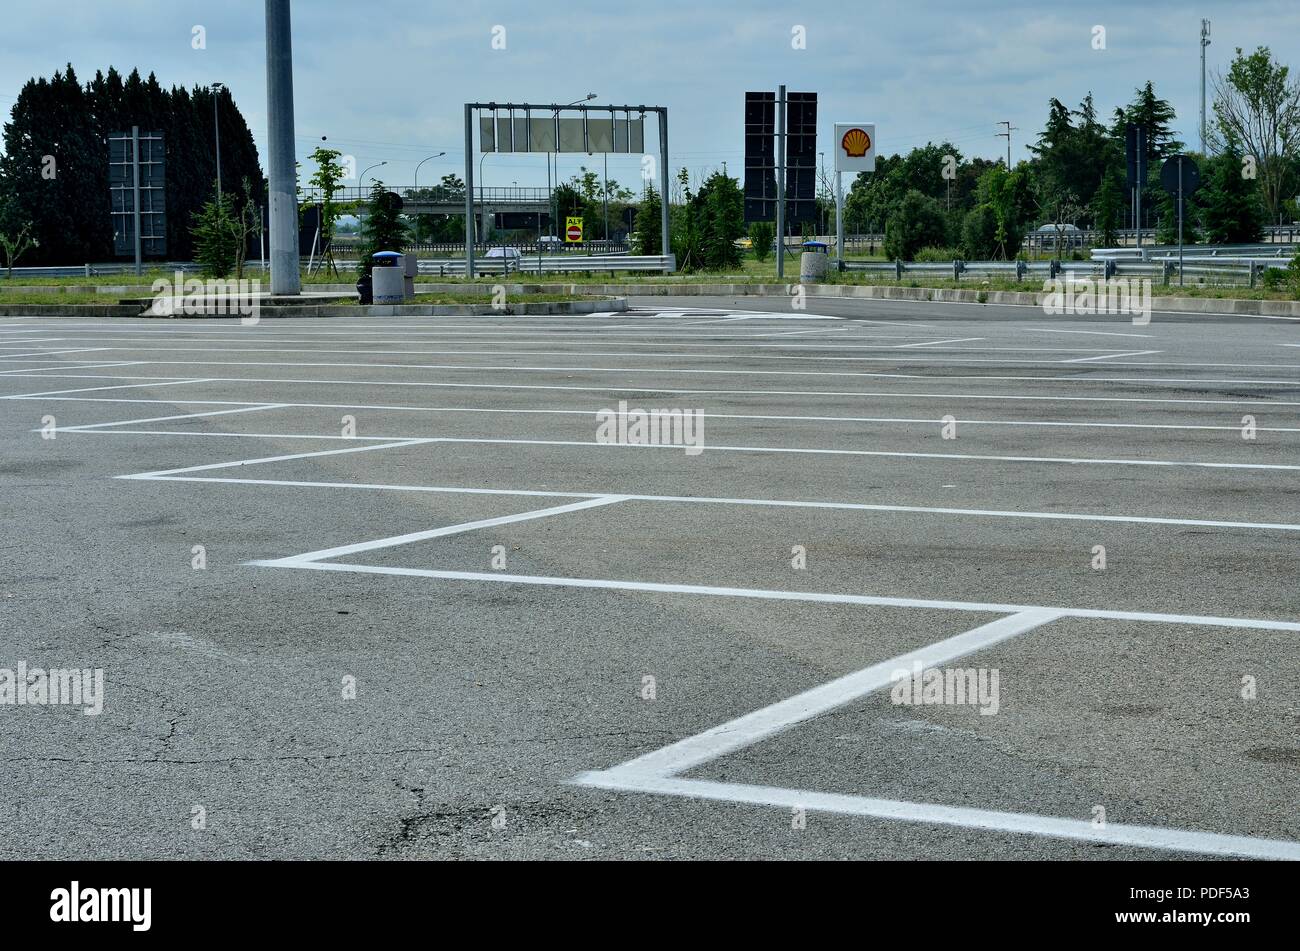 Parking Marks of a Truck Rest Area /Parking Area / Bay / Bay/Site near Shell Petrol station / Gas / Fuel Station along side a highway near Pisa, Italy Stock Photo